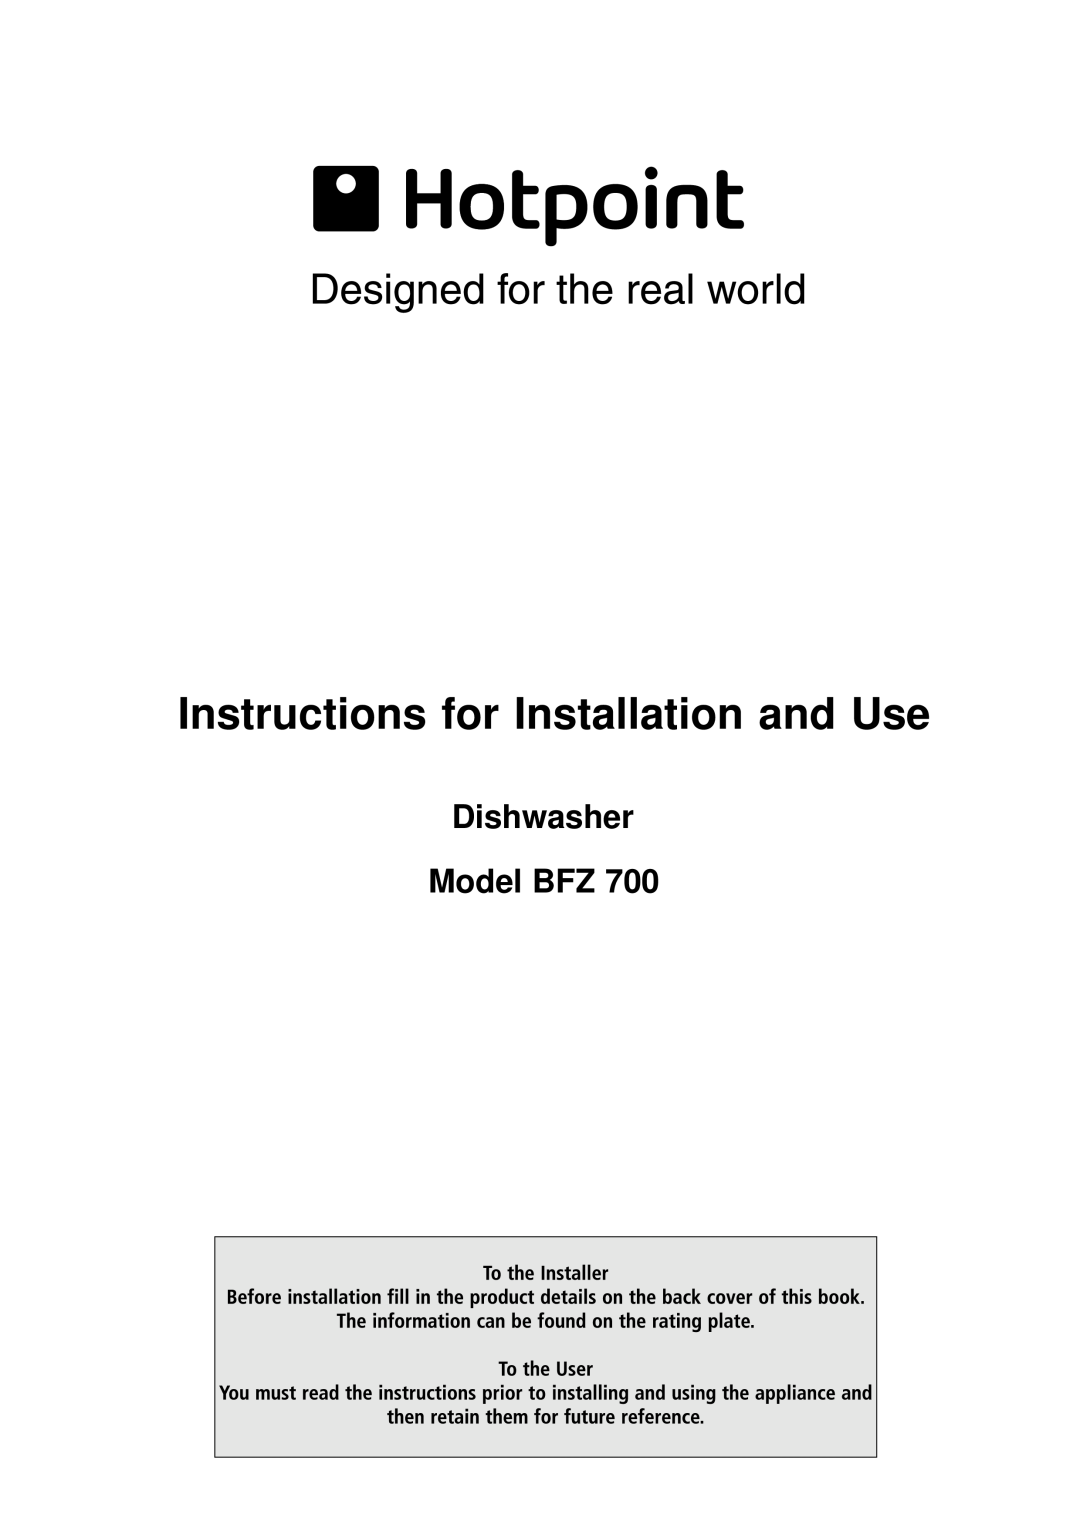 Hotpoint BFZ 700 manual Instructions for Installation and Use, Dishwasher Model BFZ 